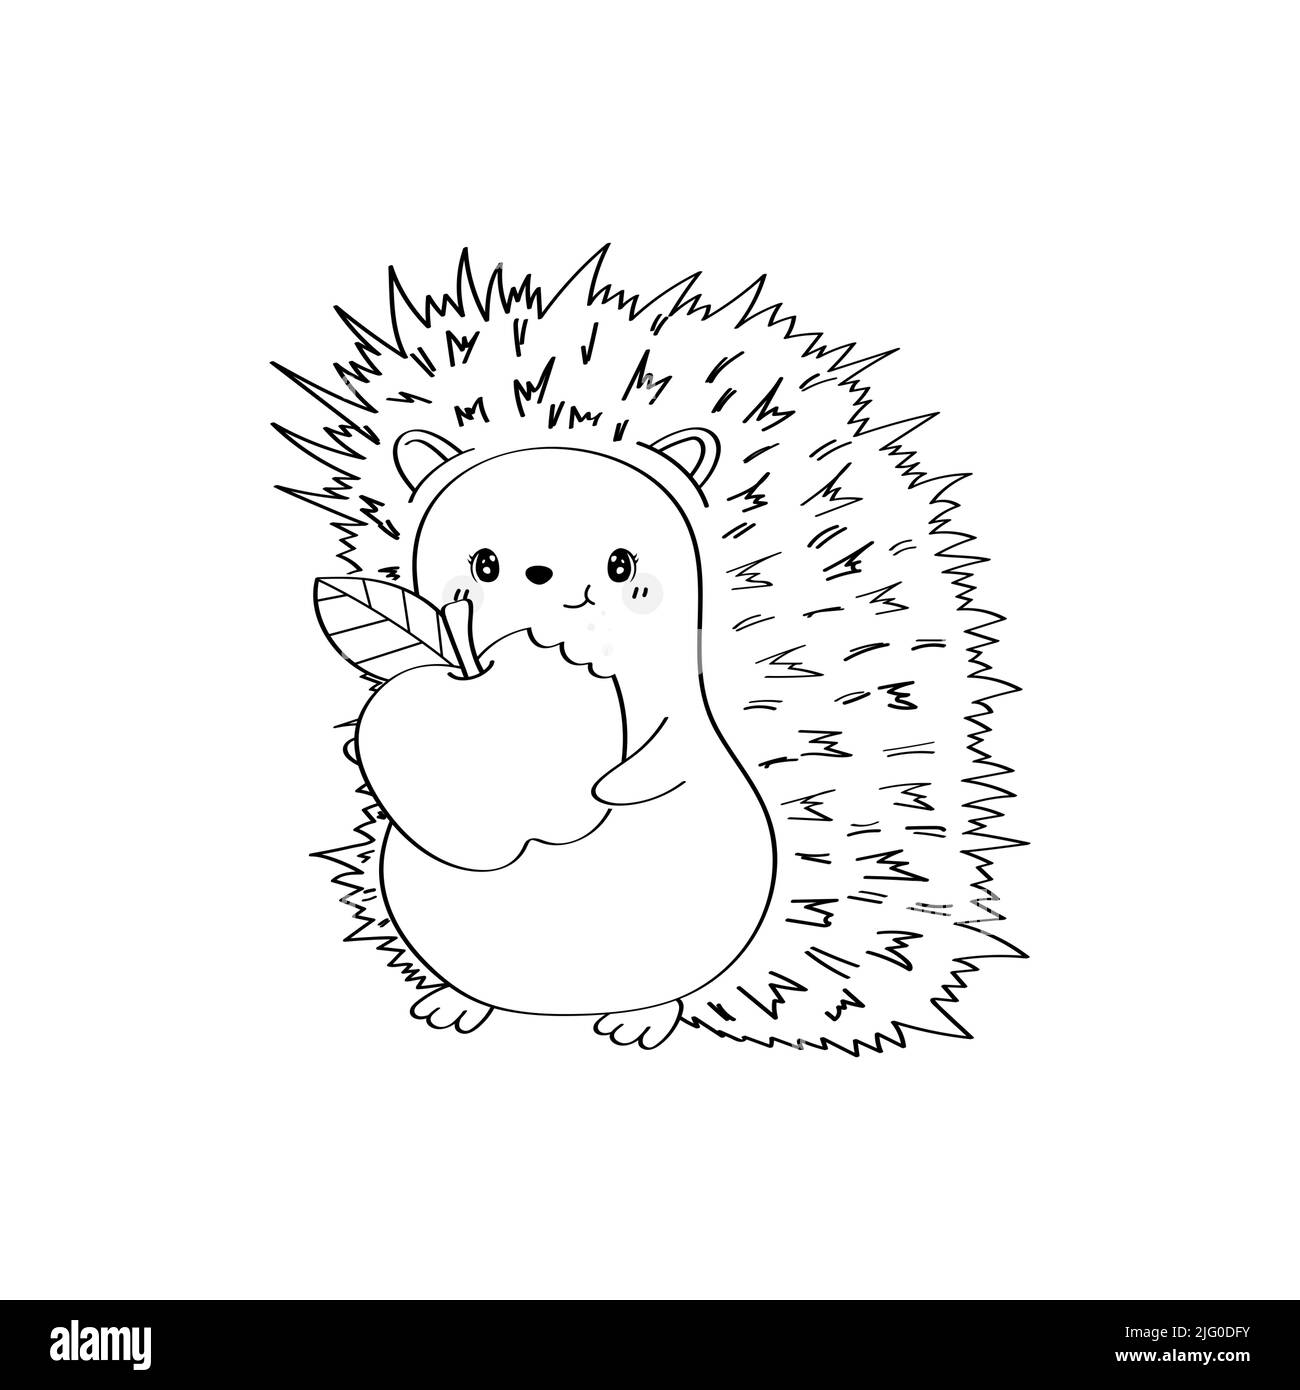 Coloring Page Hedgehog Clipart Character Design. Adorable Clip Art Hedgehog Black and White. Vector Illustration of an Forest Animal for Prints for Stock Vector